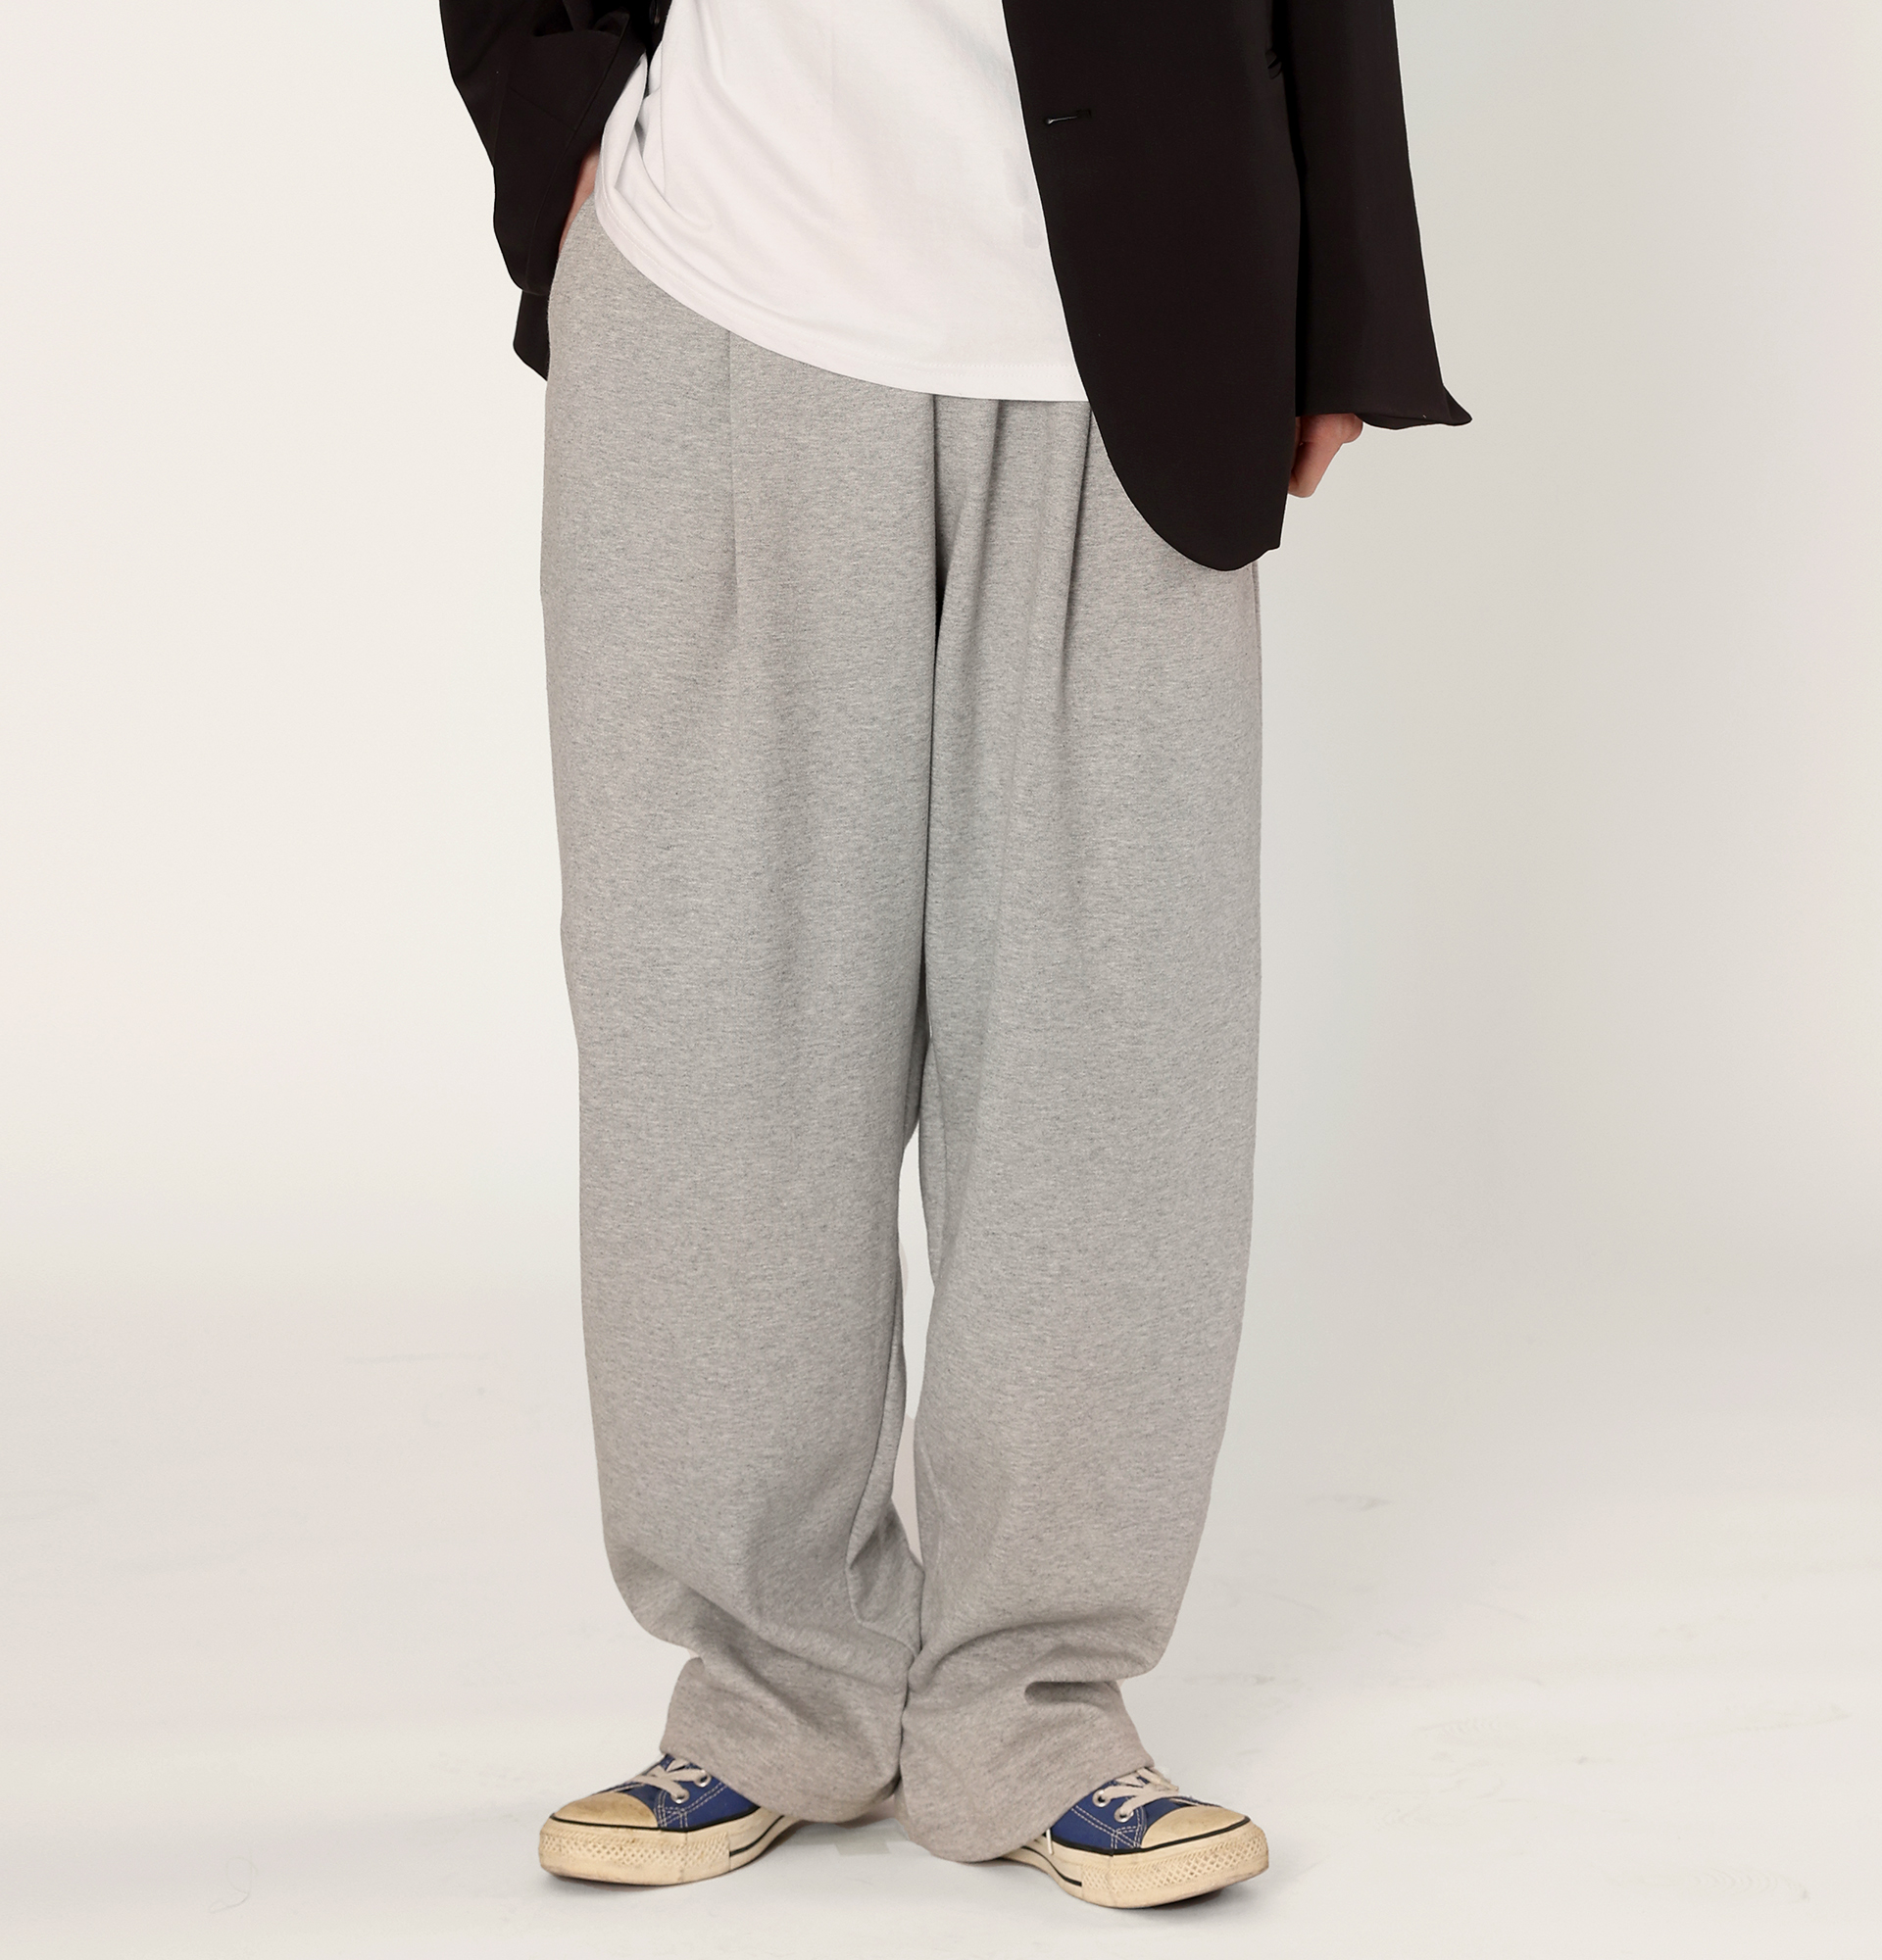 Hue one tuck wide fit pants gray